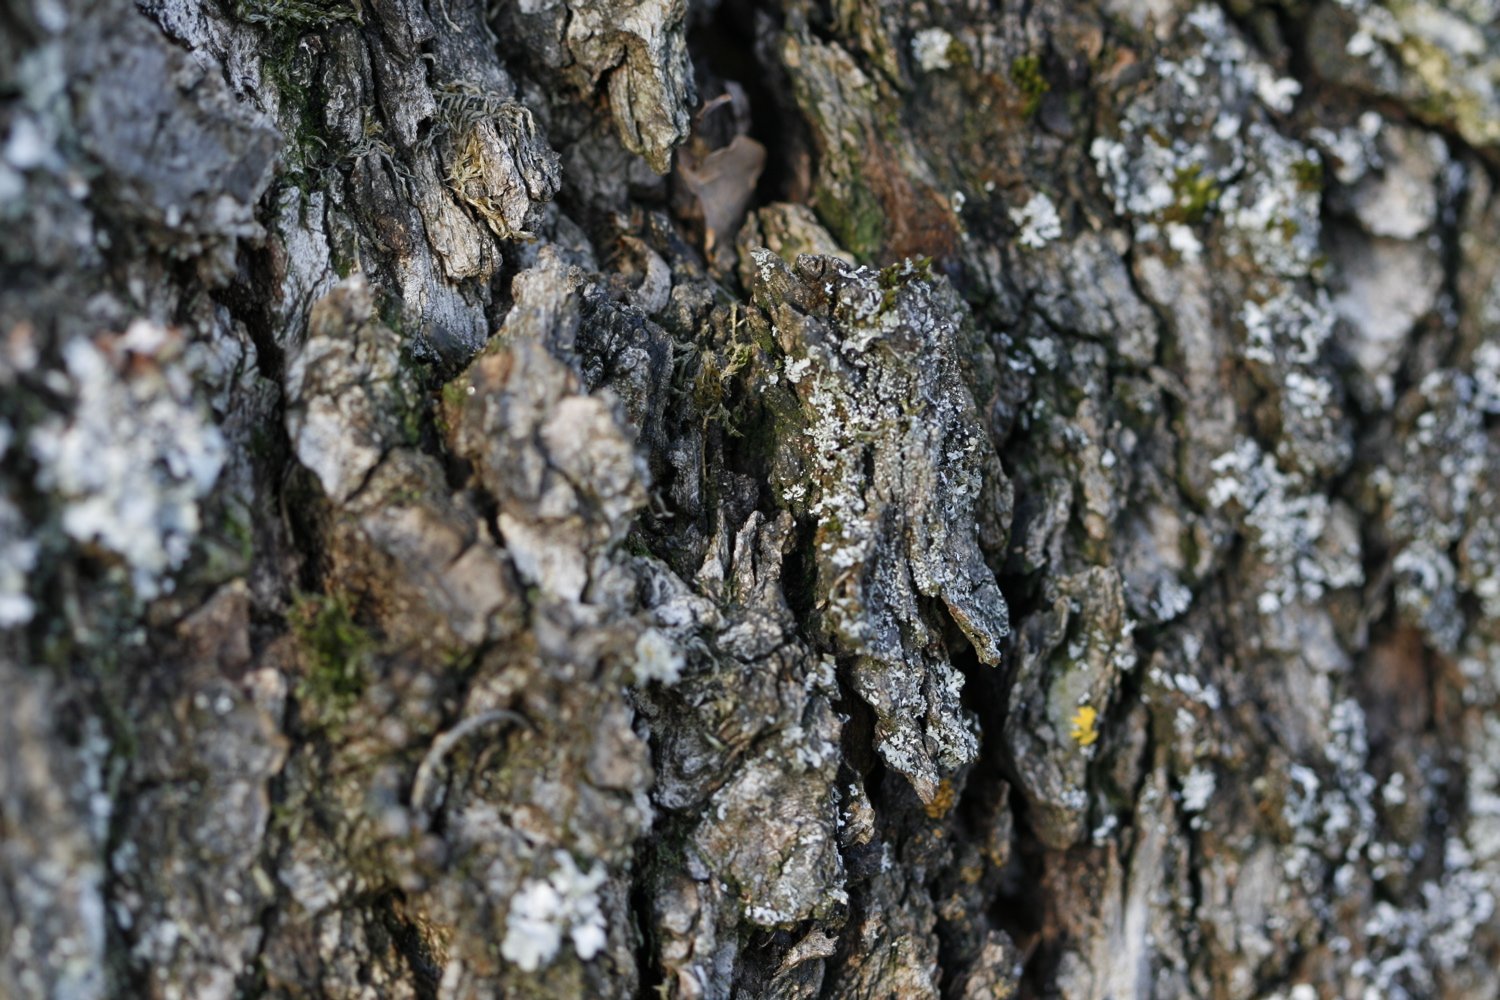 a squirrel hides in the bark of a tree